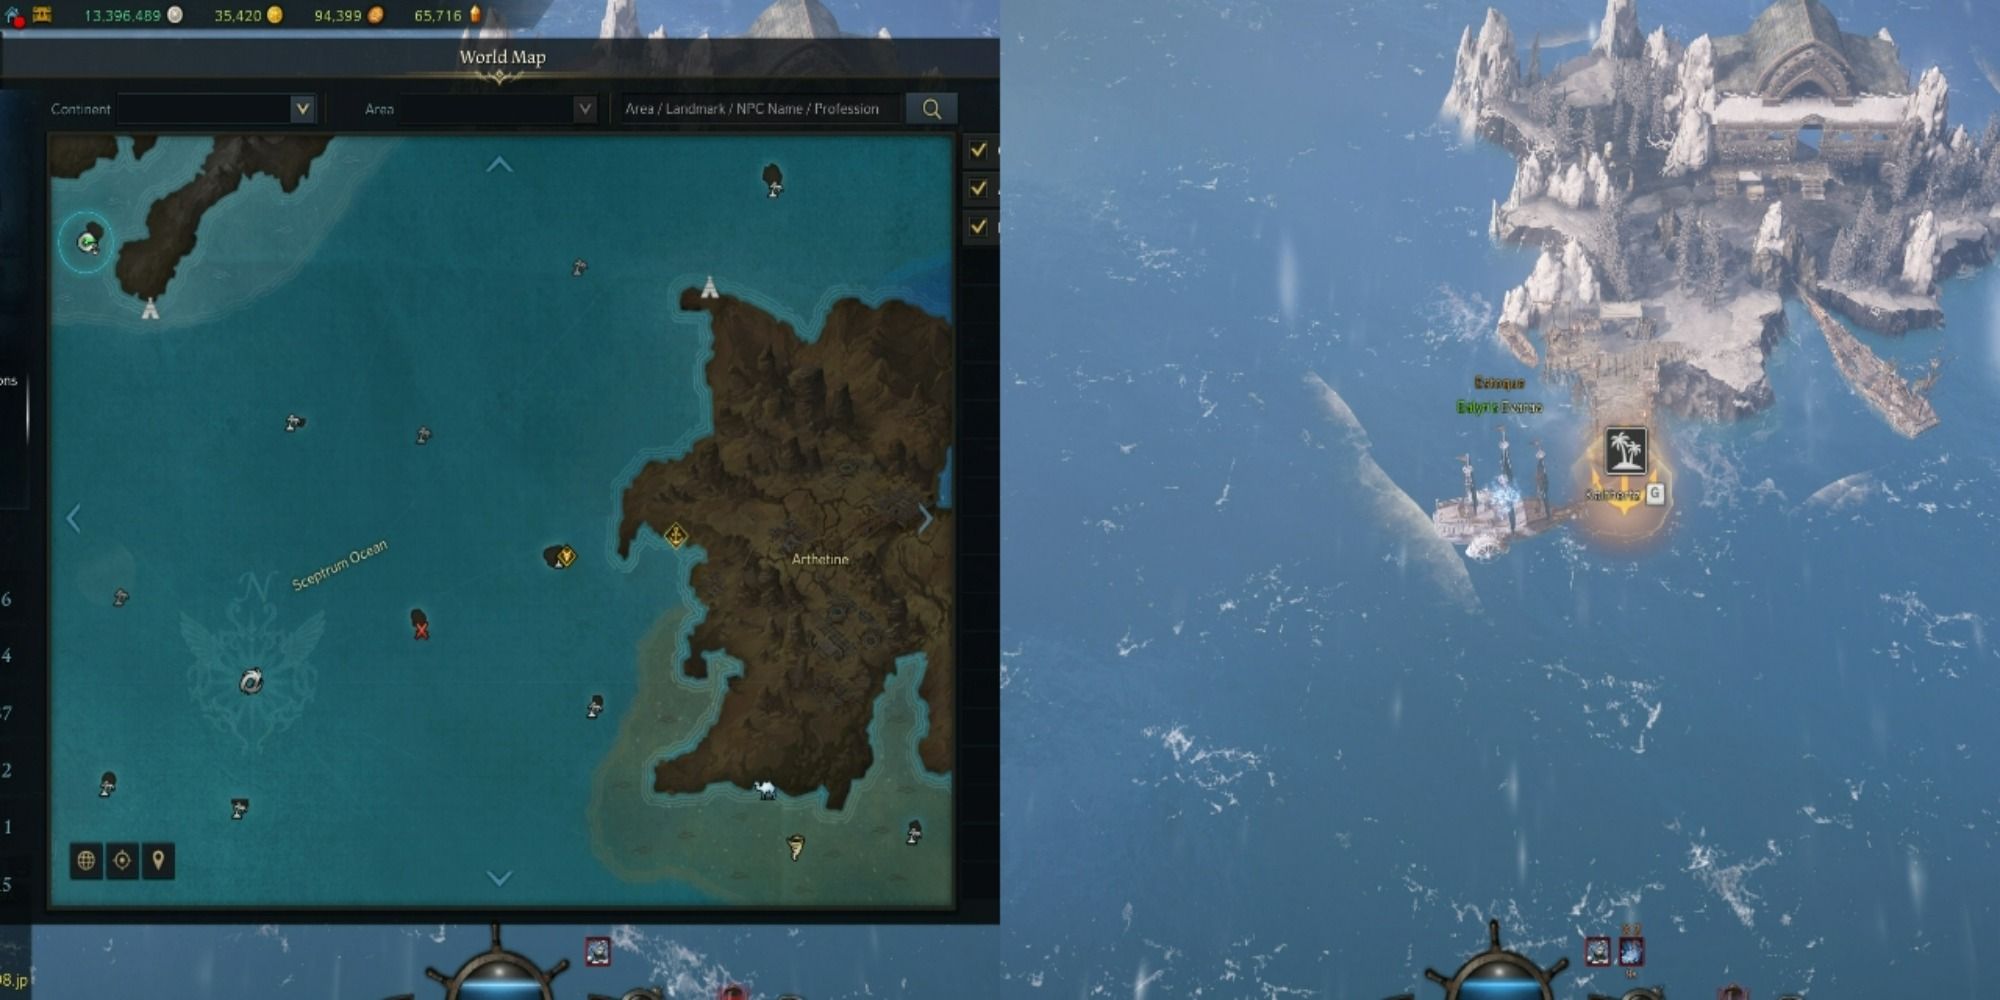 Lost Ark split image of Kalthertz Island location on open seas and on map